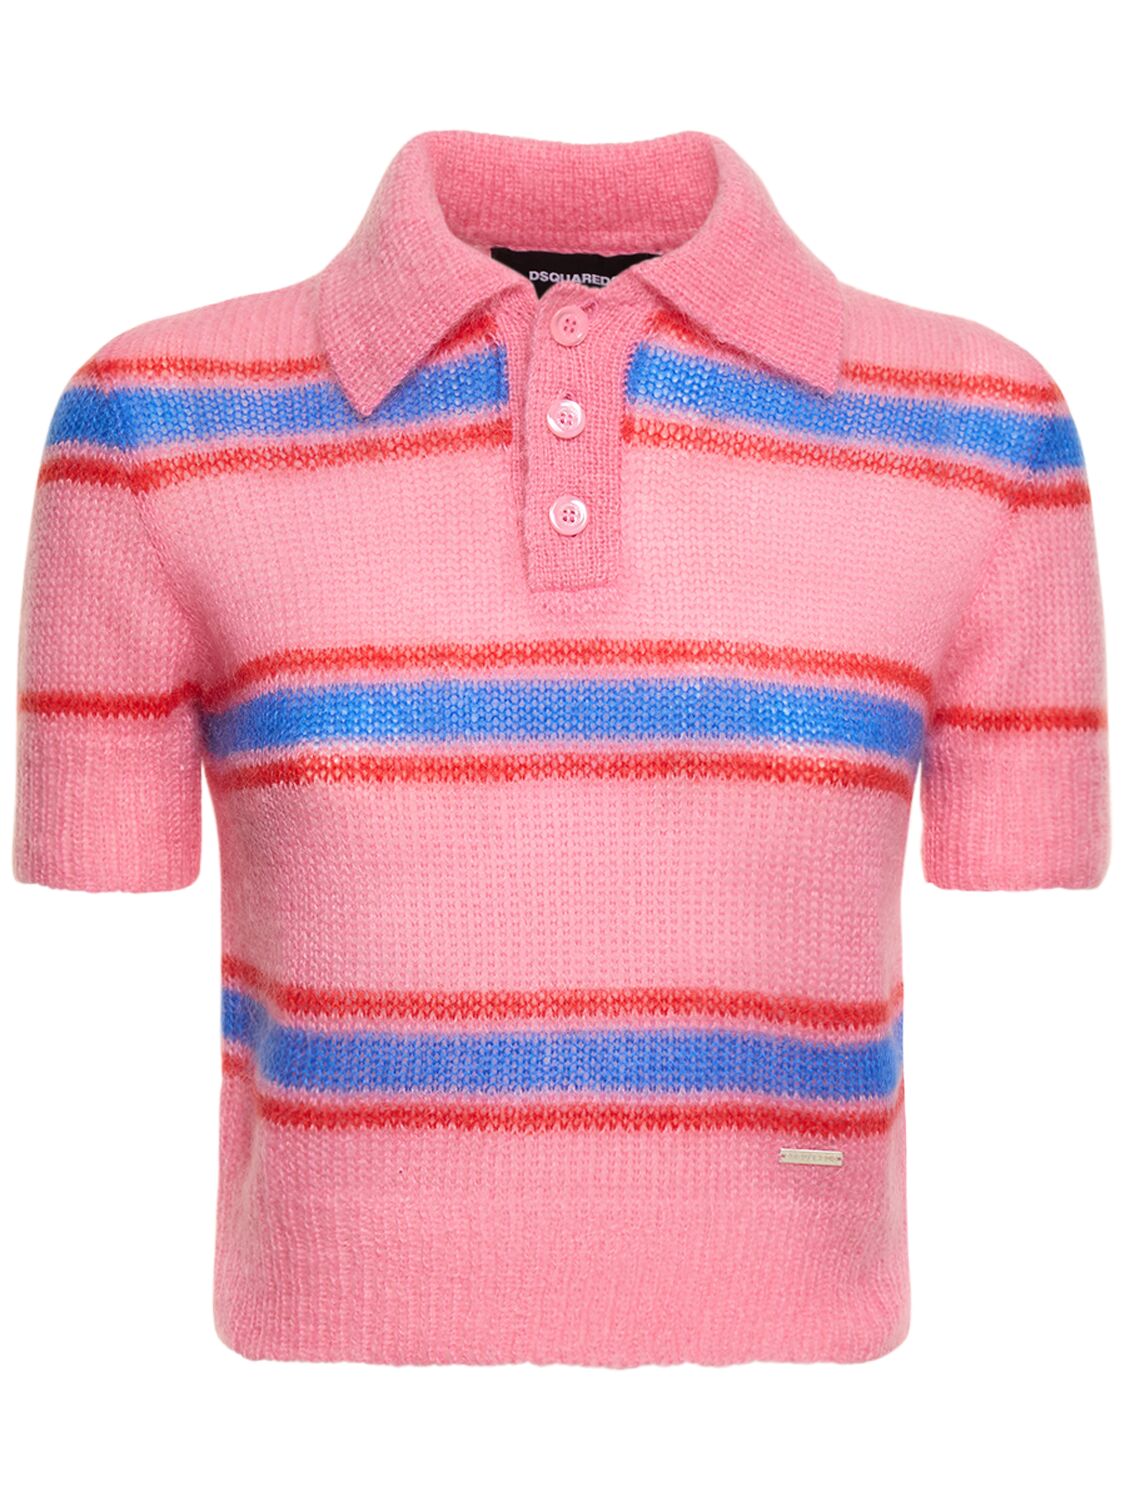 In Dsquared2 Brushed-knit Striped Polo Top ModeSens Pink,blue,red |